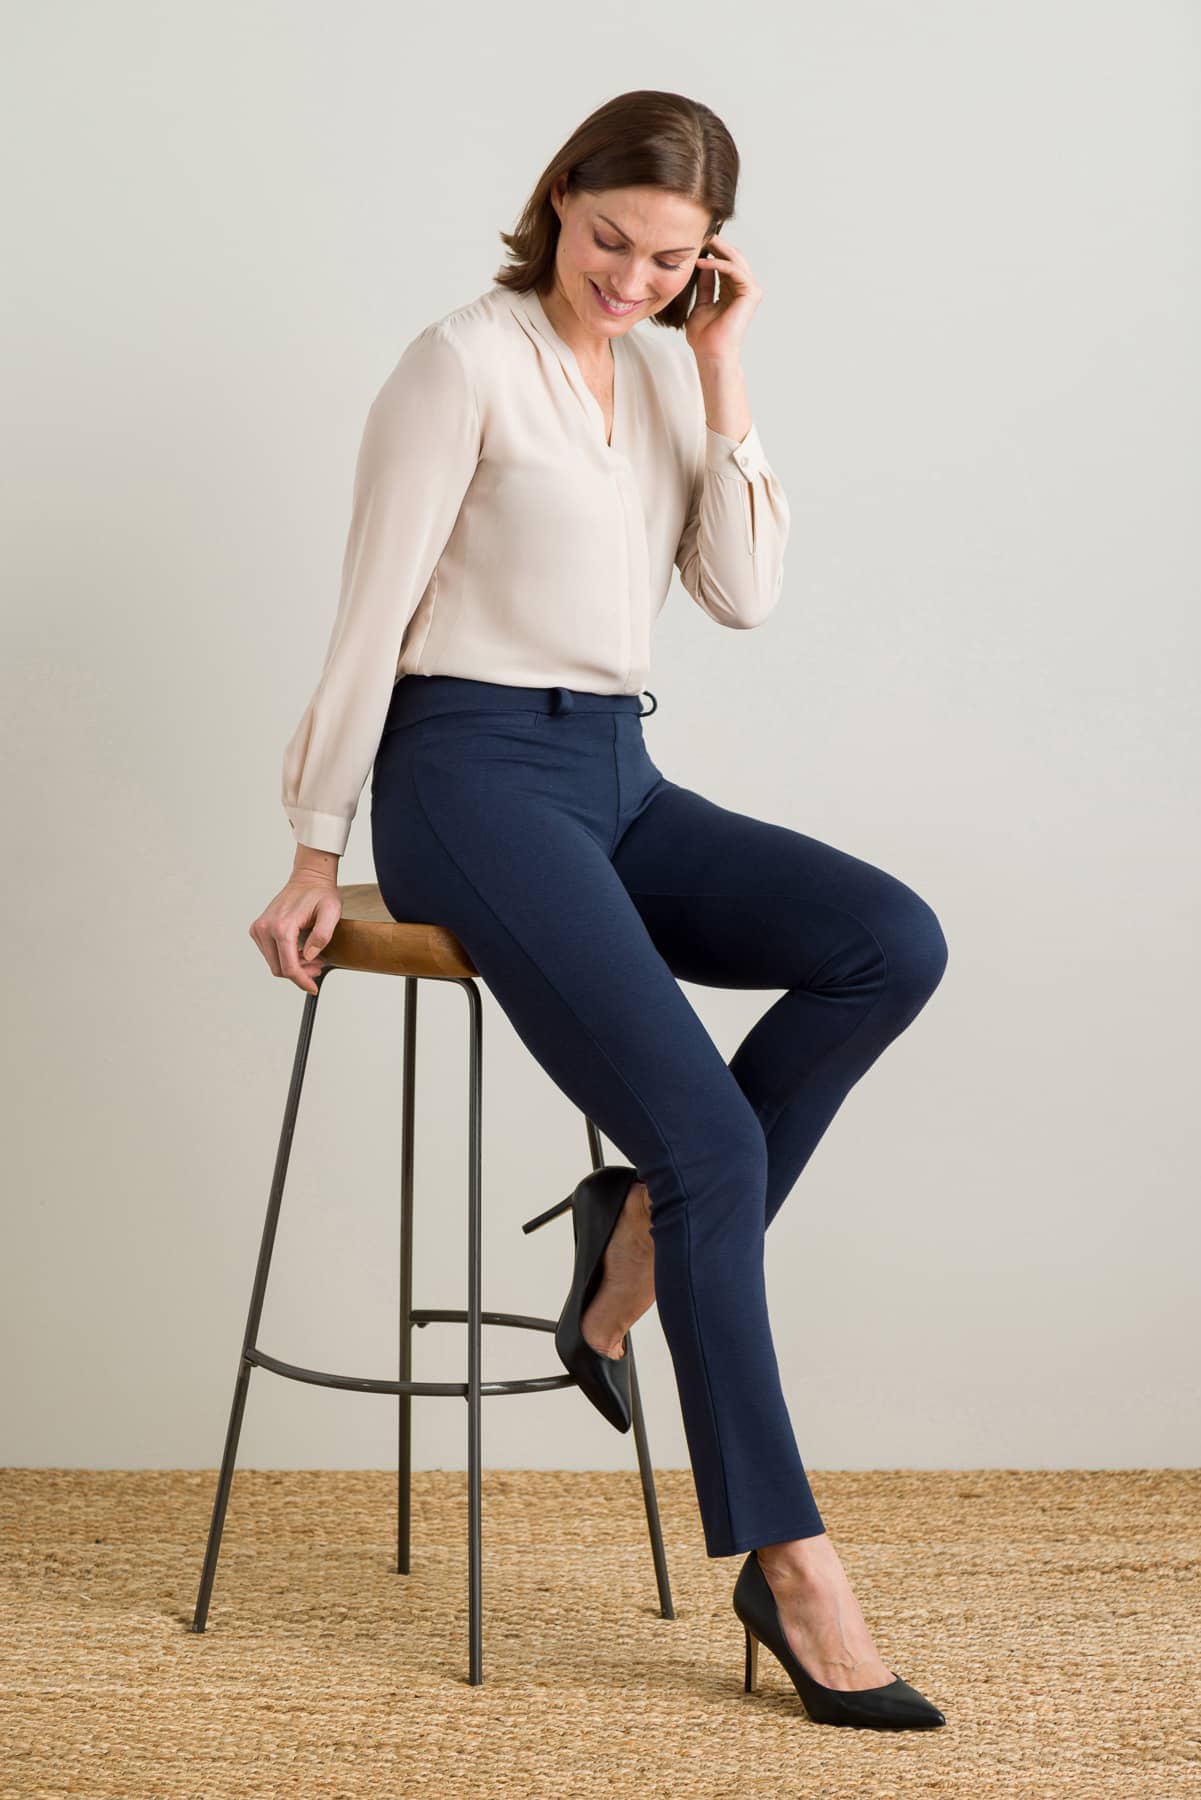 Cato Fashions | Cato Petite Stretchy Crepe Trouser Pants